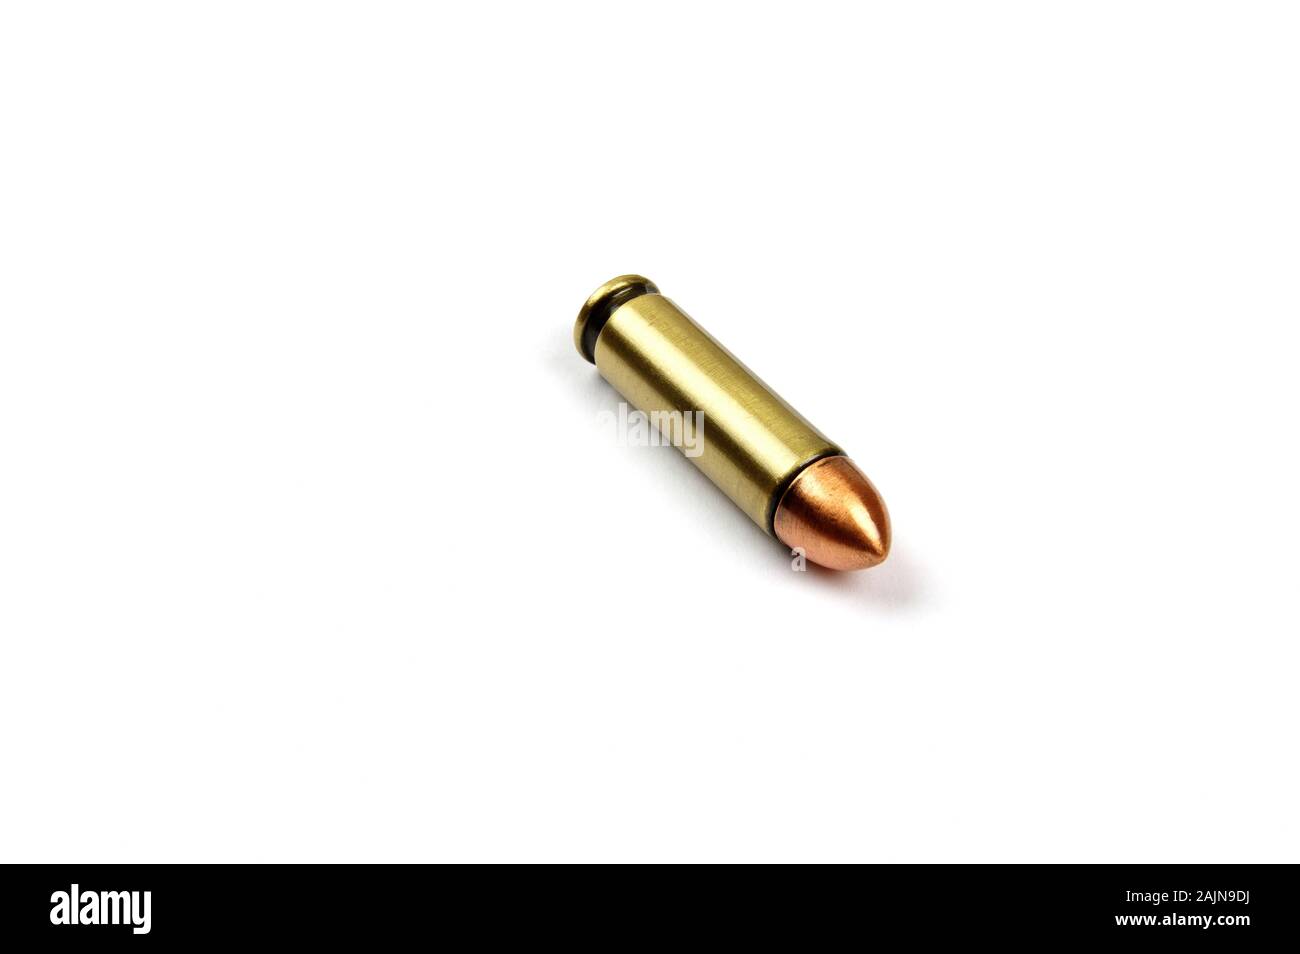 one single hand pistol bullet on a white background Stock Photo